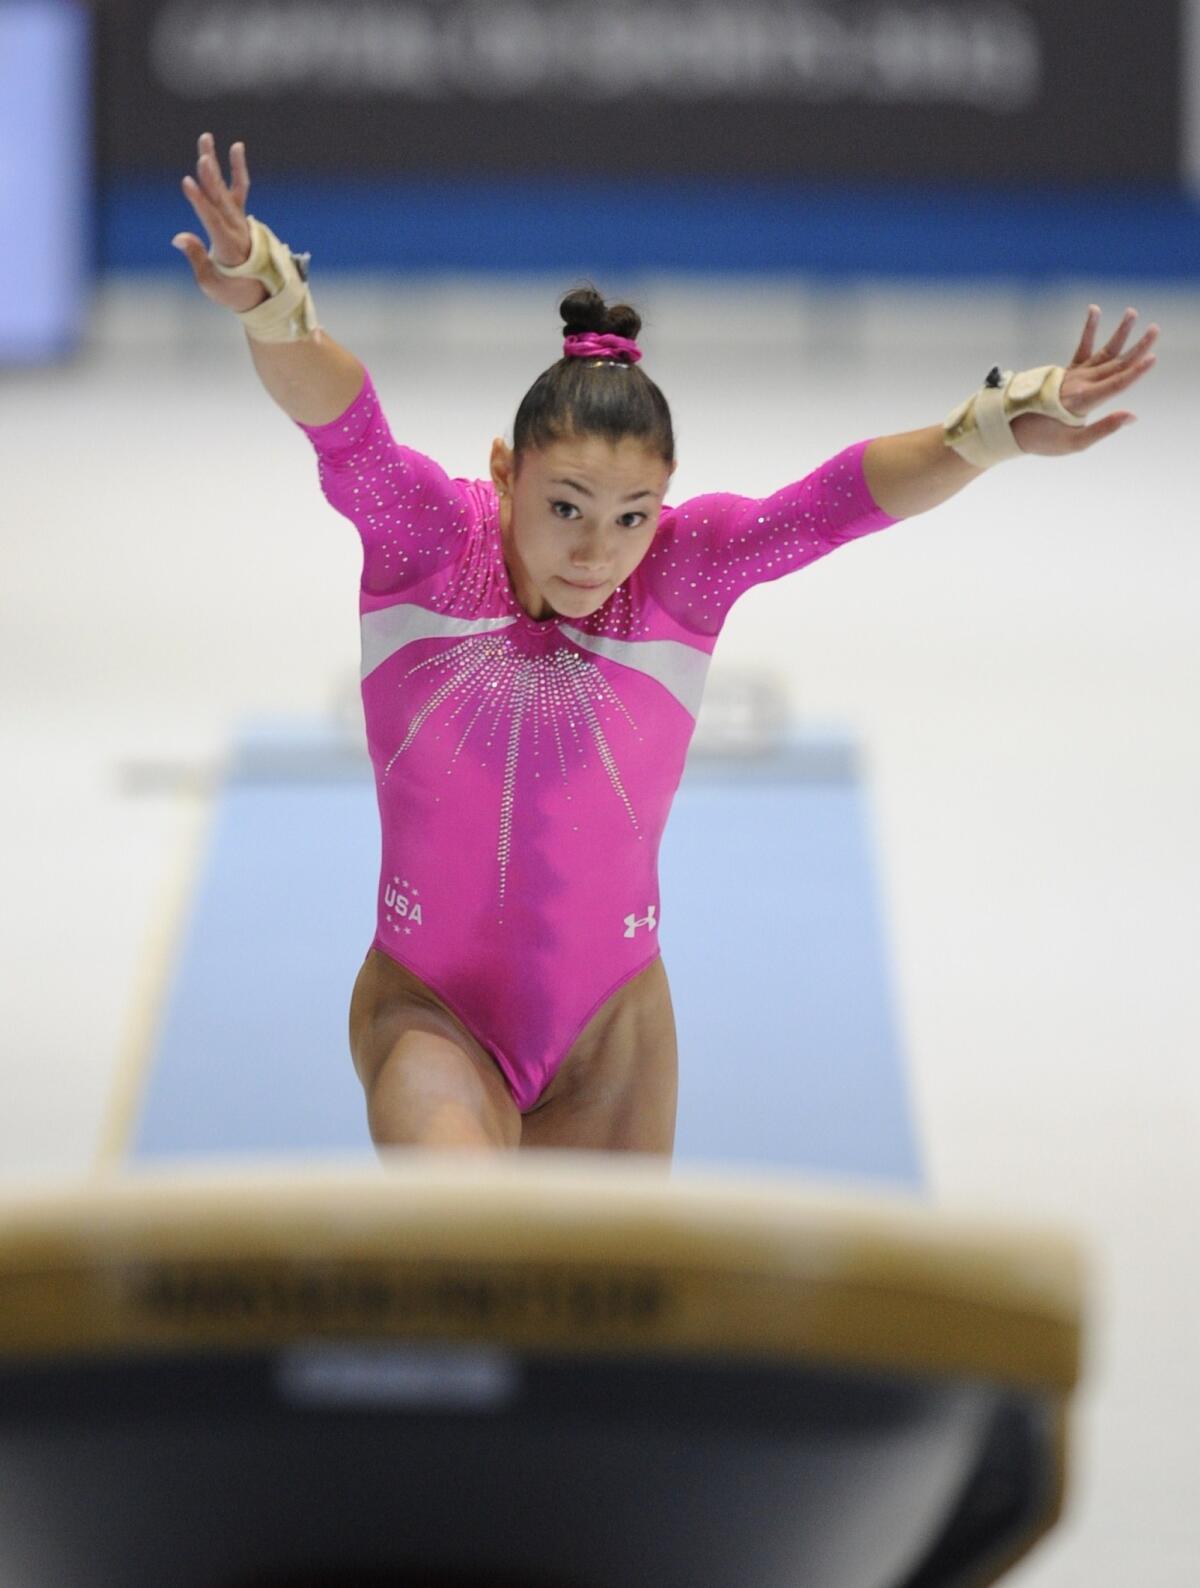 Kyla Ross competes on the vault during her performance in the all-around final at the 2013 world championships Friday.